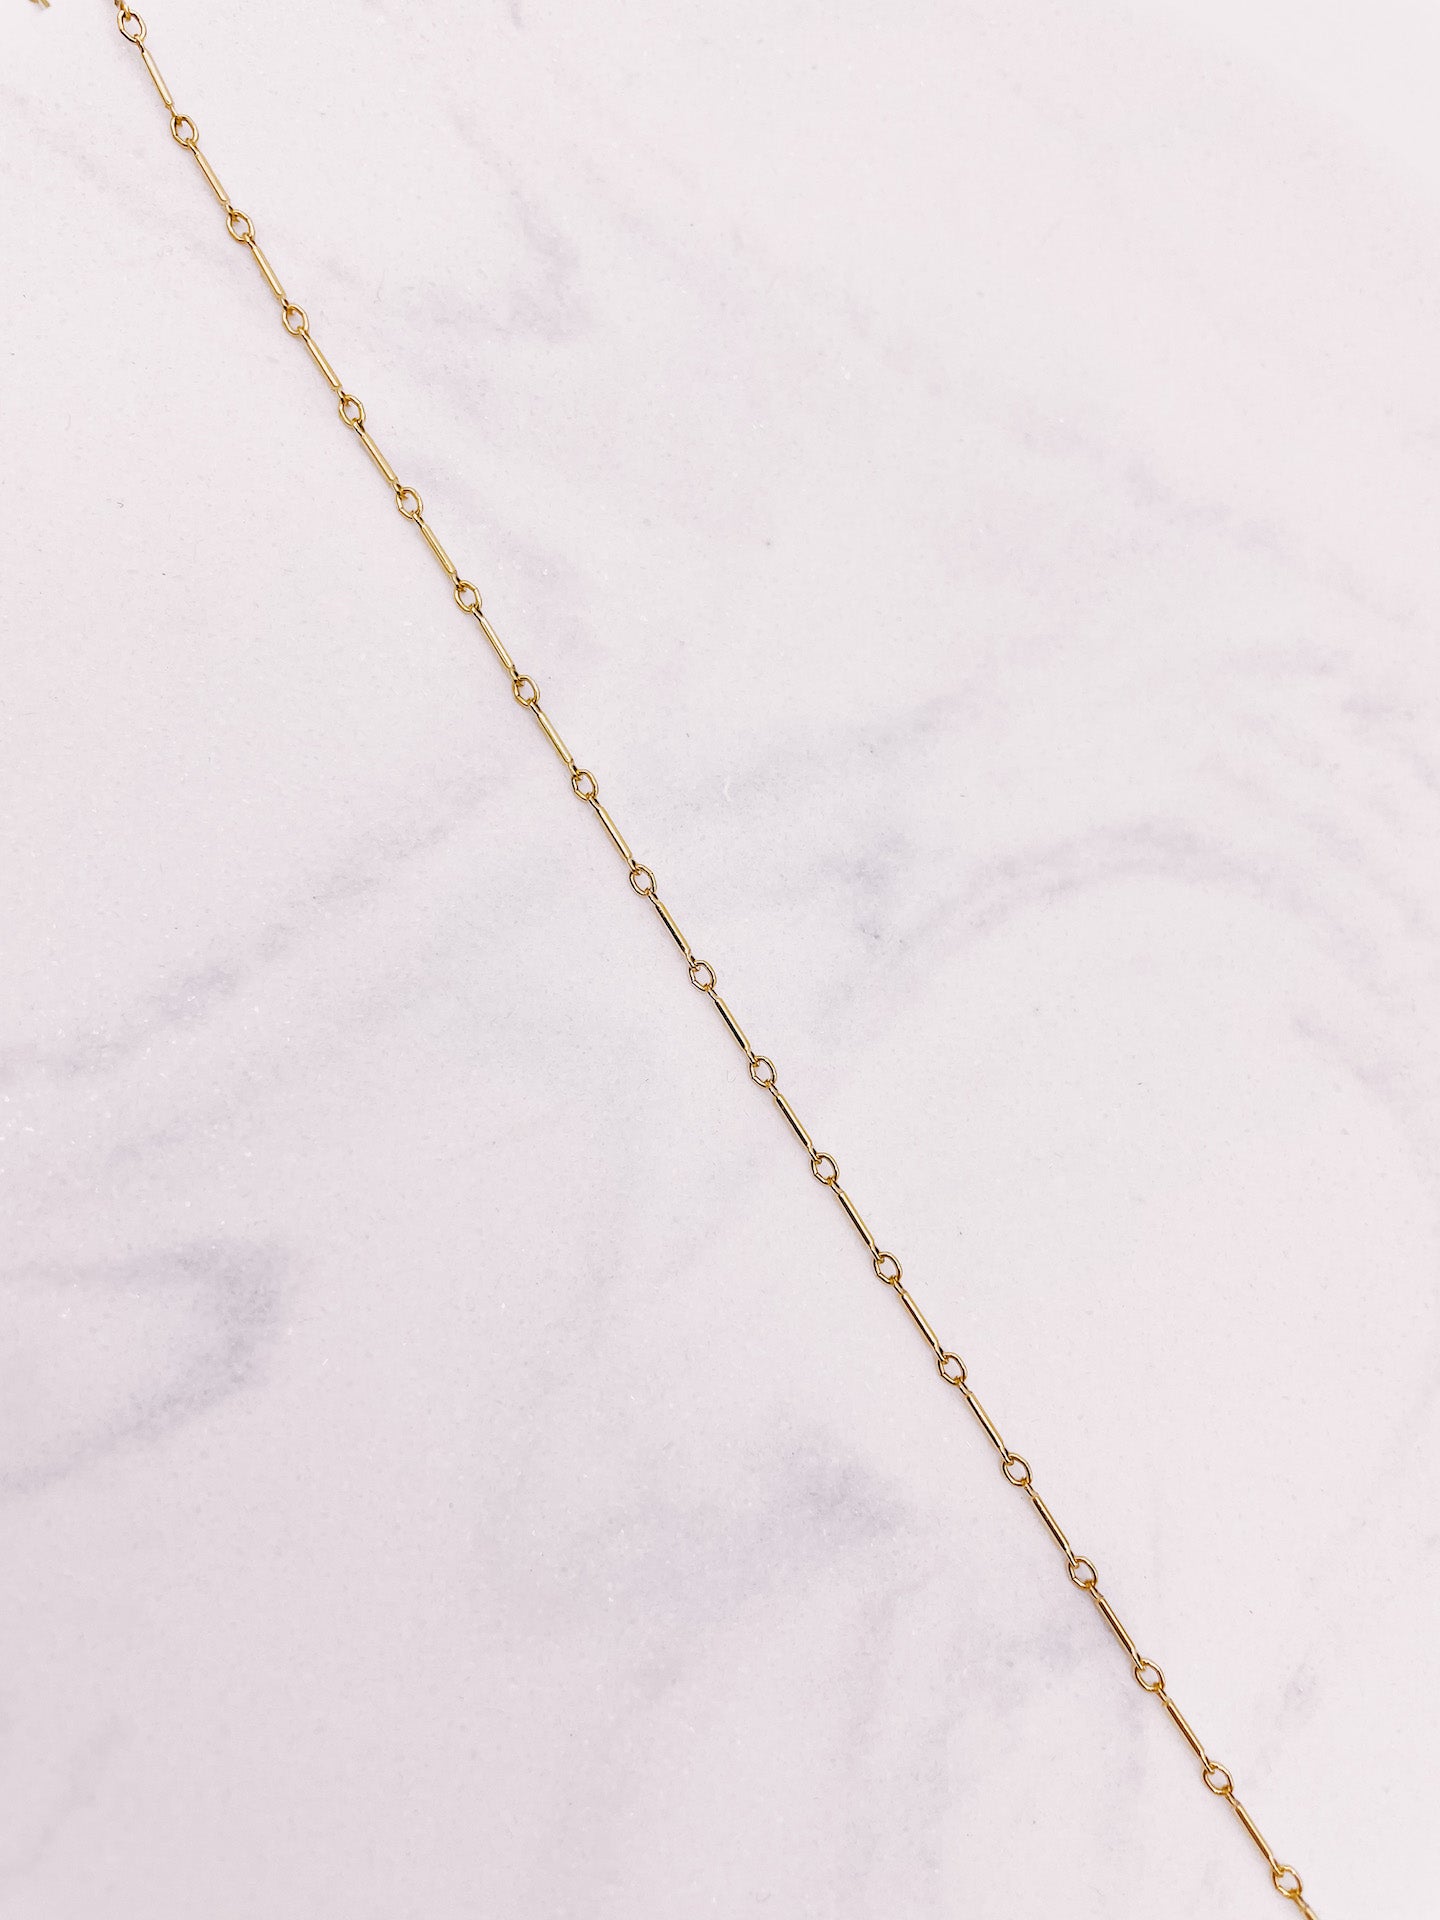 Close up of Bar Link Chain Necklace from AW Boutique gold filled jewellery.